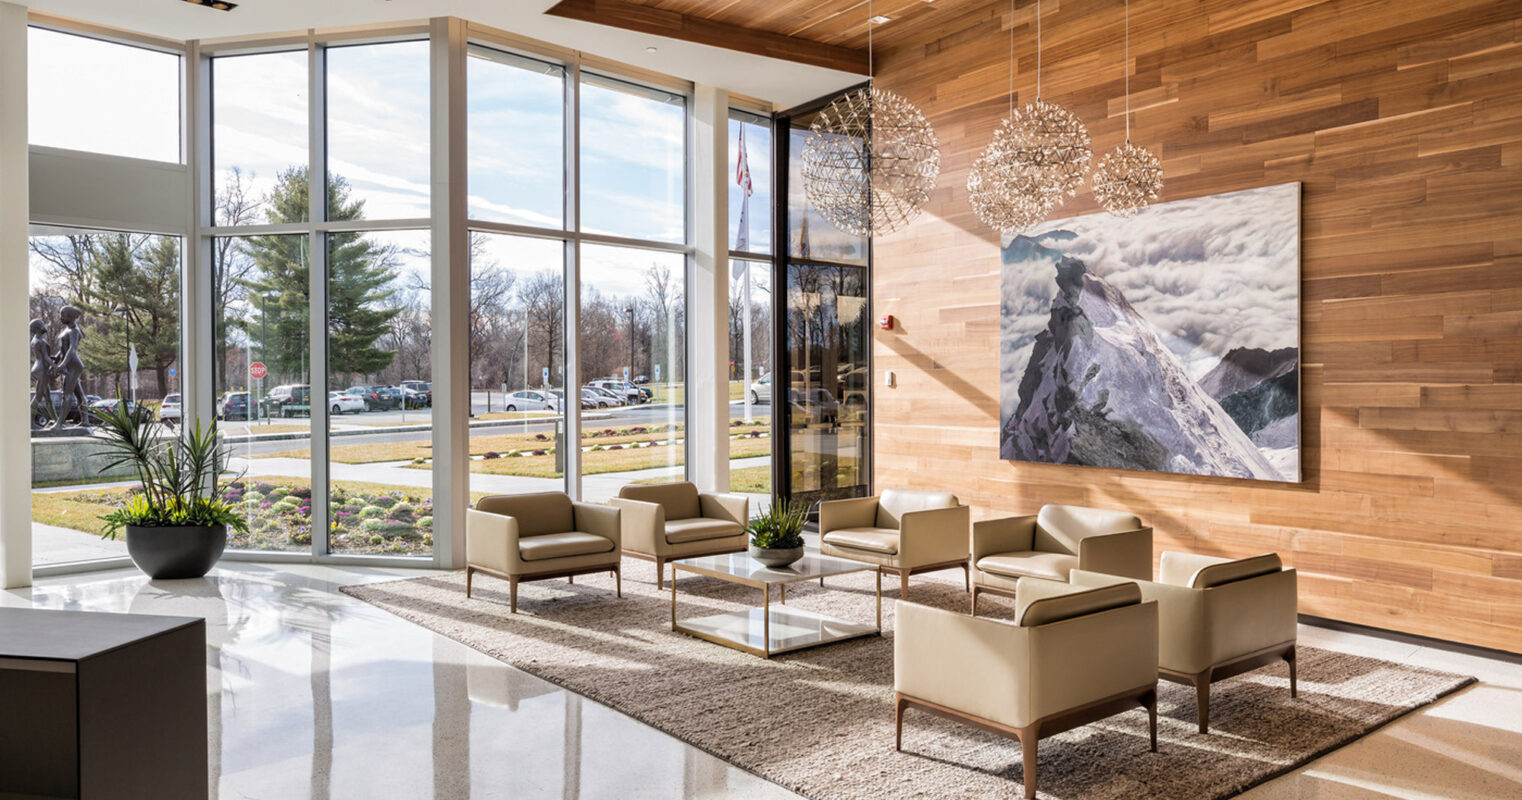 Spacious lobby with floor-to-ceiling windows, modern tan armchairs on a textured rug, wood panel walls, and striking spherical chandeliers. A large mountainous landscape photograph serves as a focal point.